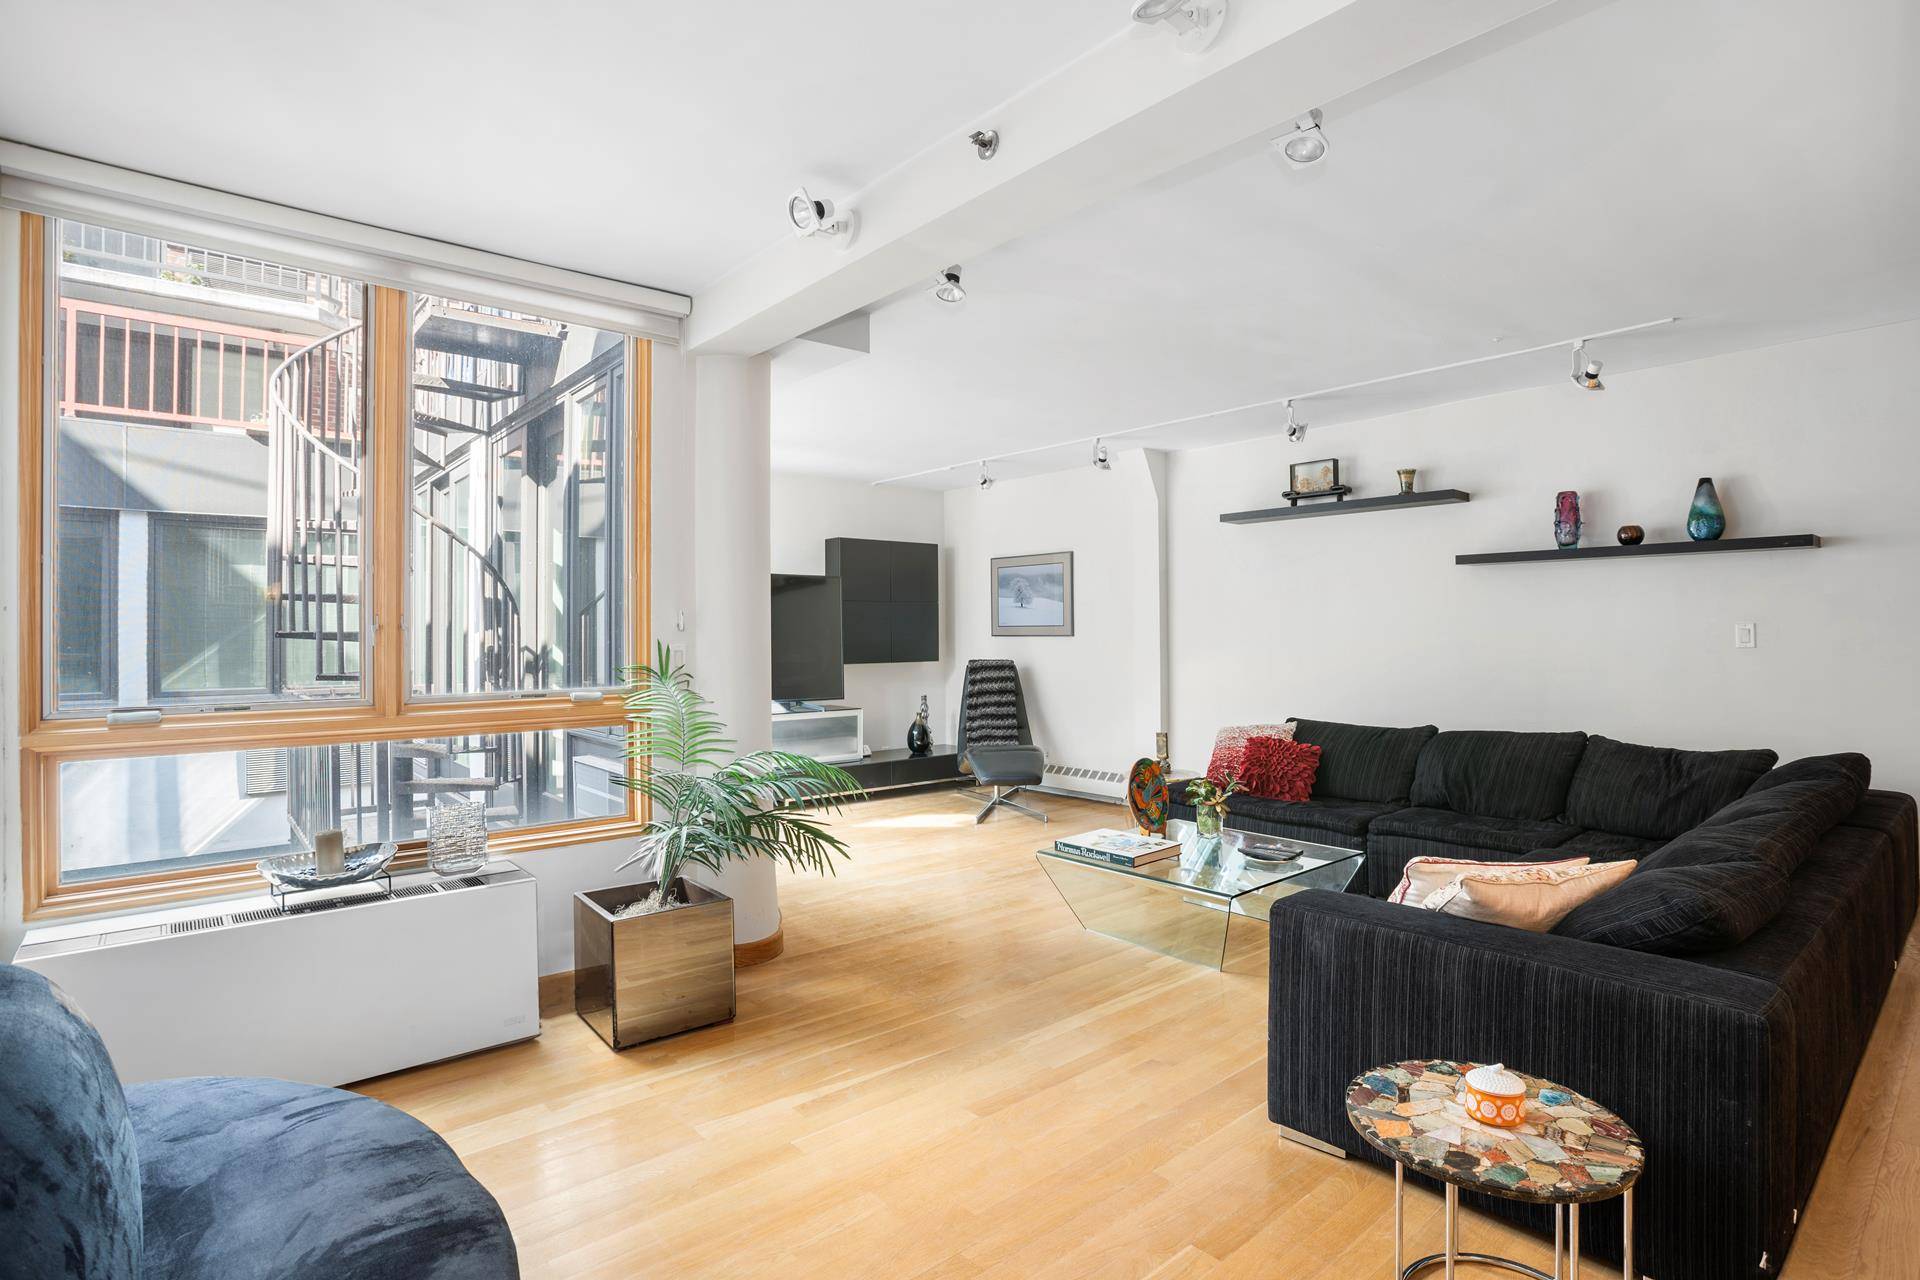 BRING OFFERS ! This fabulous duplex condo home spans over 2, 000 square feet on one of the most desirable, tree lined, historic streets in the West Village.